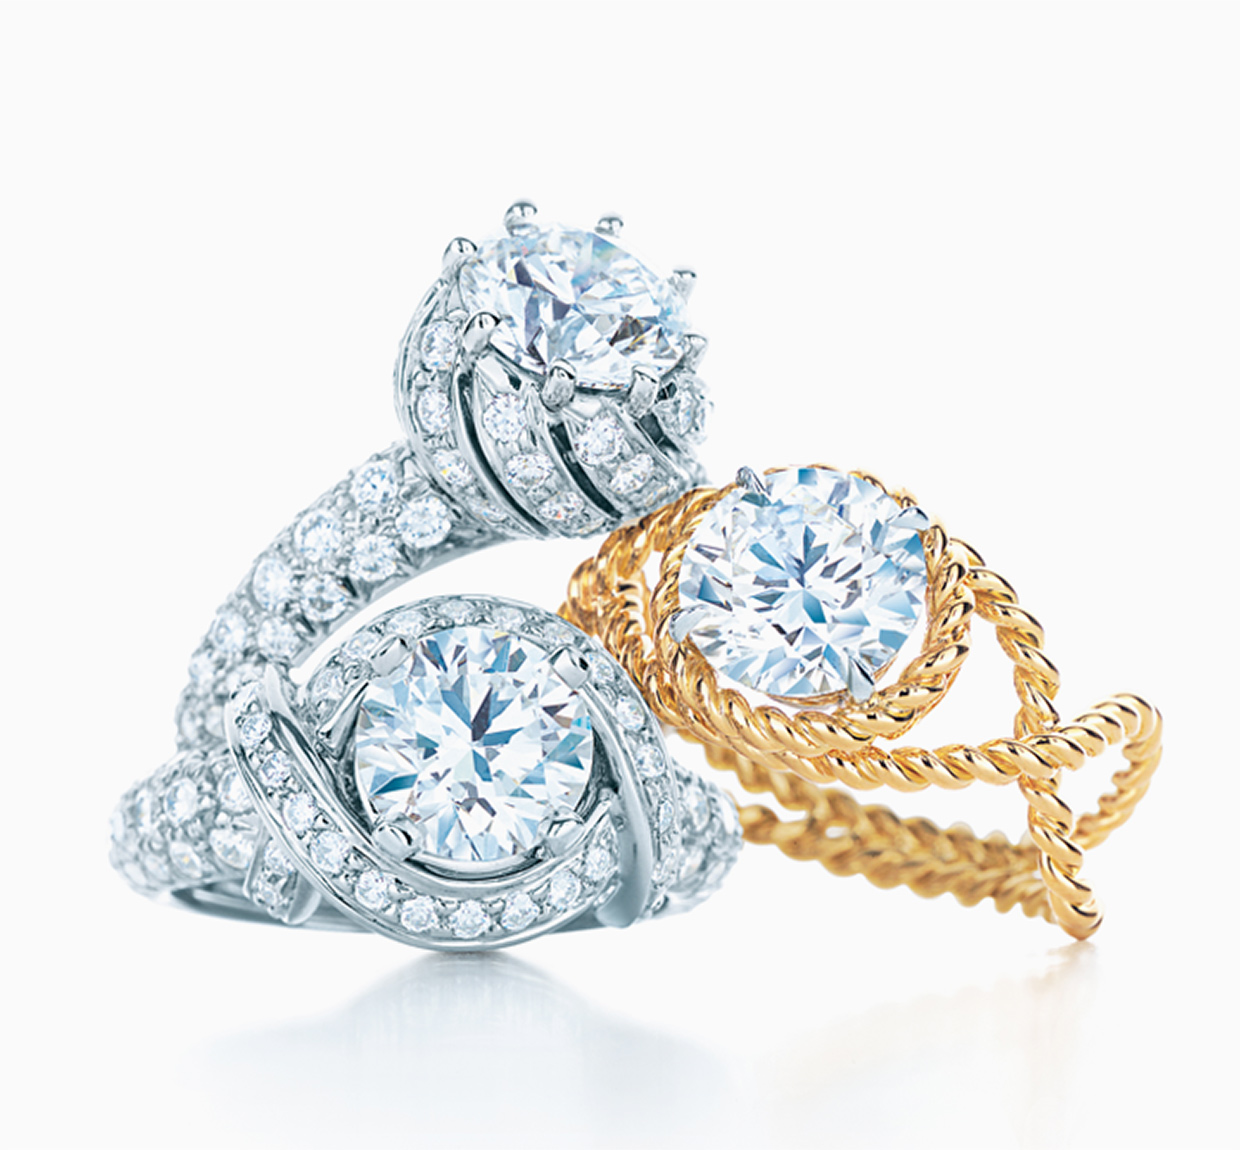  Tiffany  Co  Schlumberger  Buds Engagement  Rings  